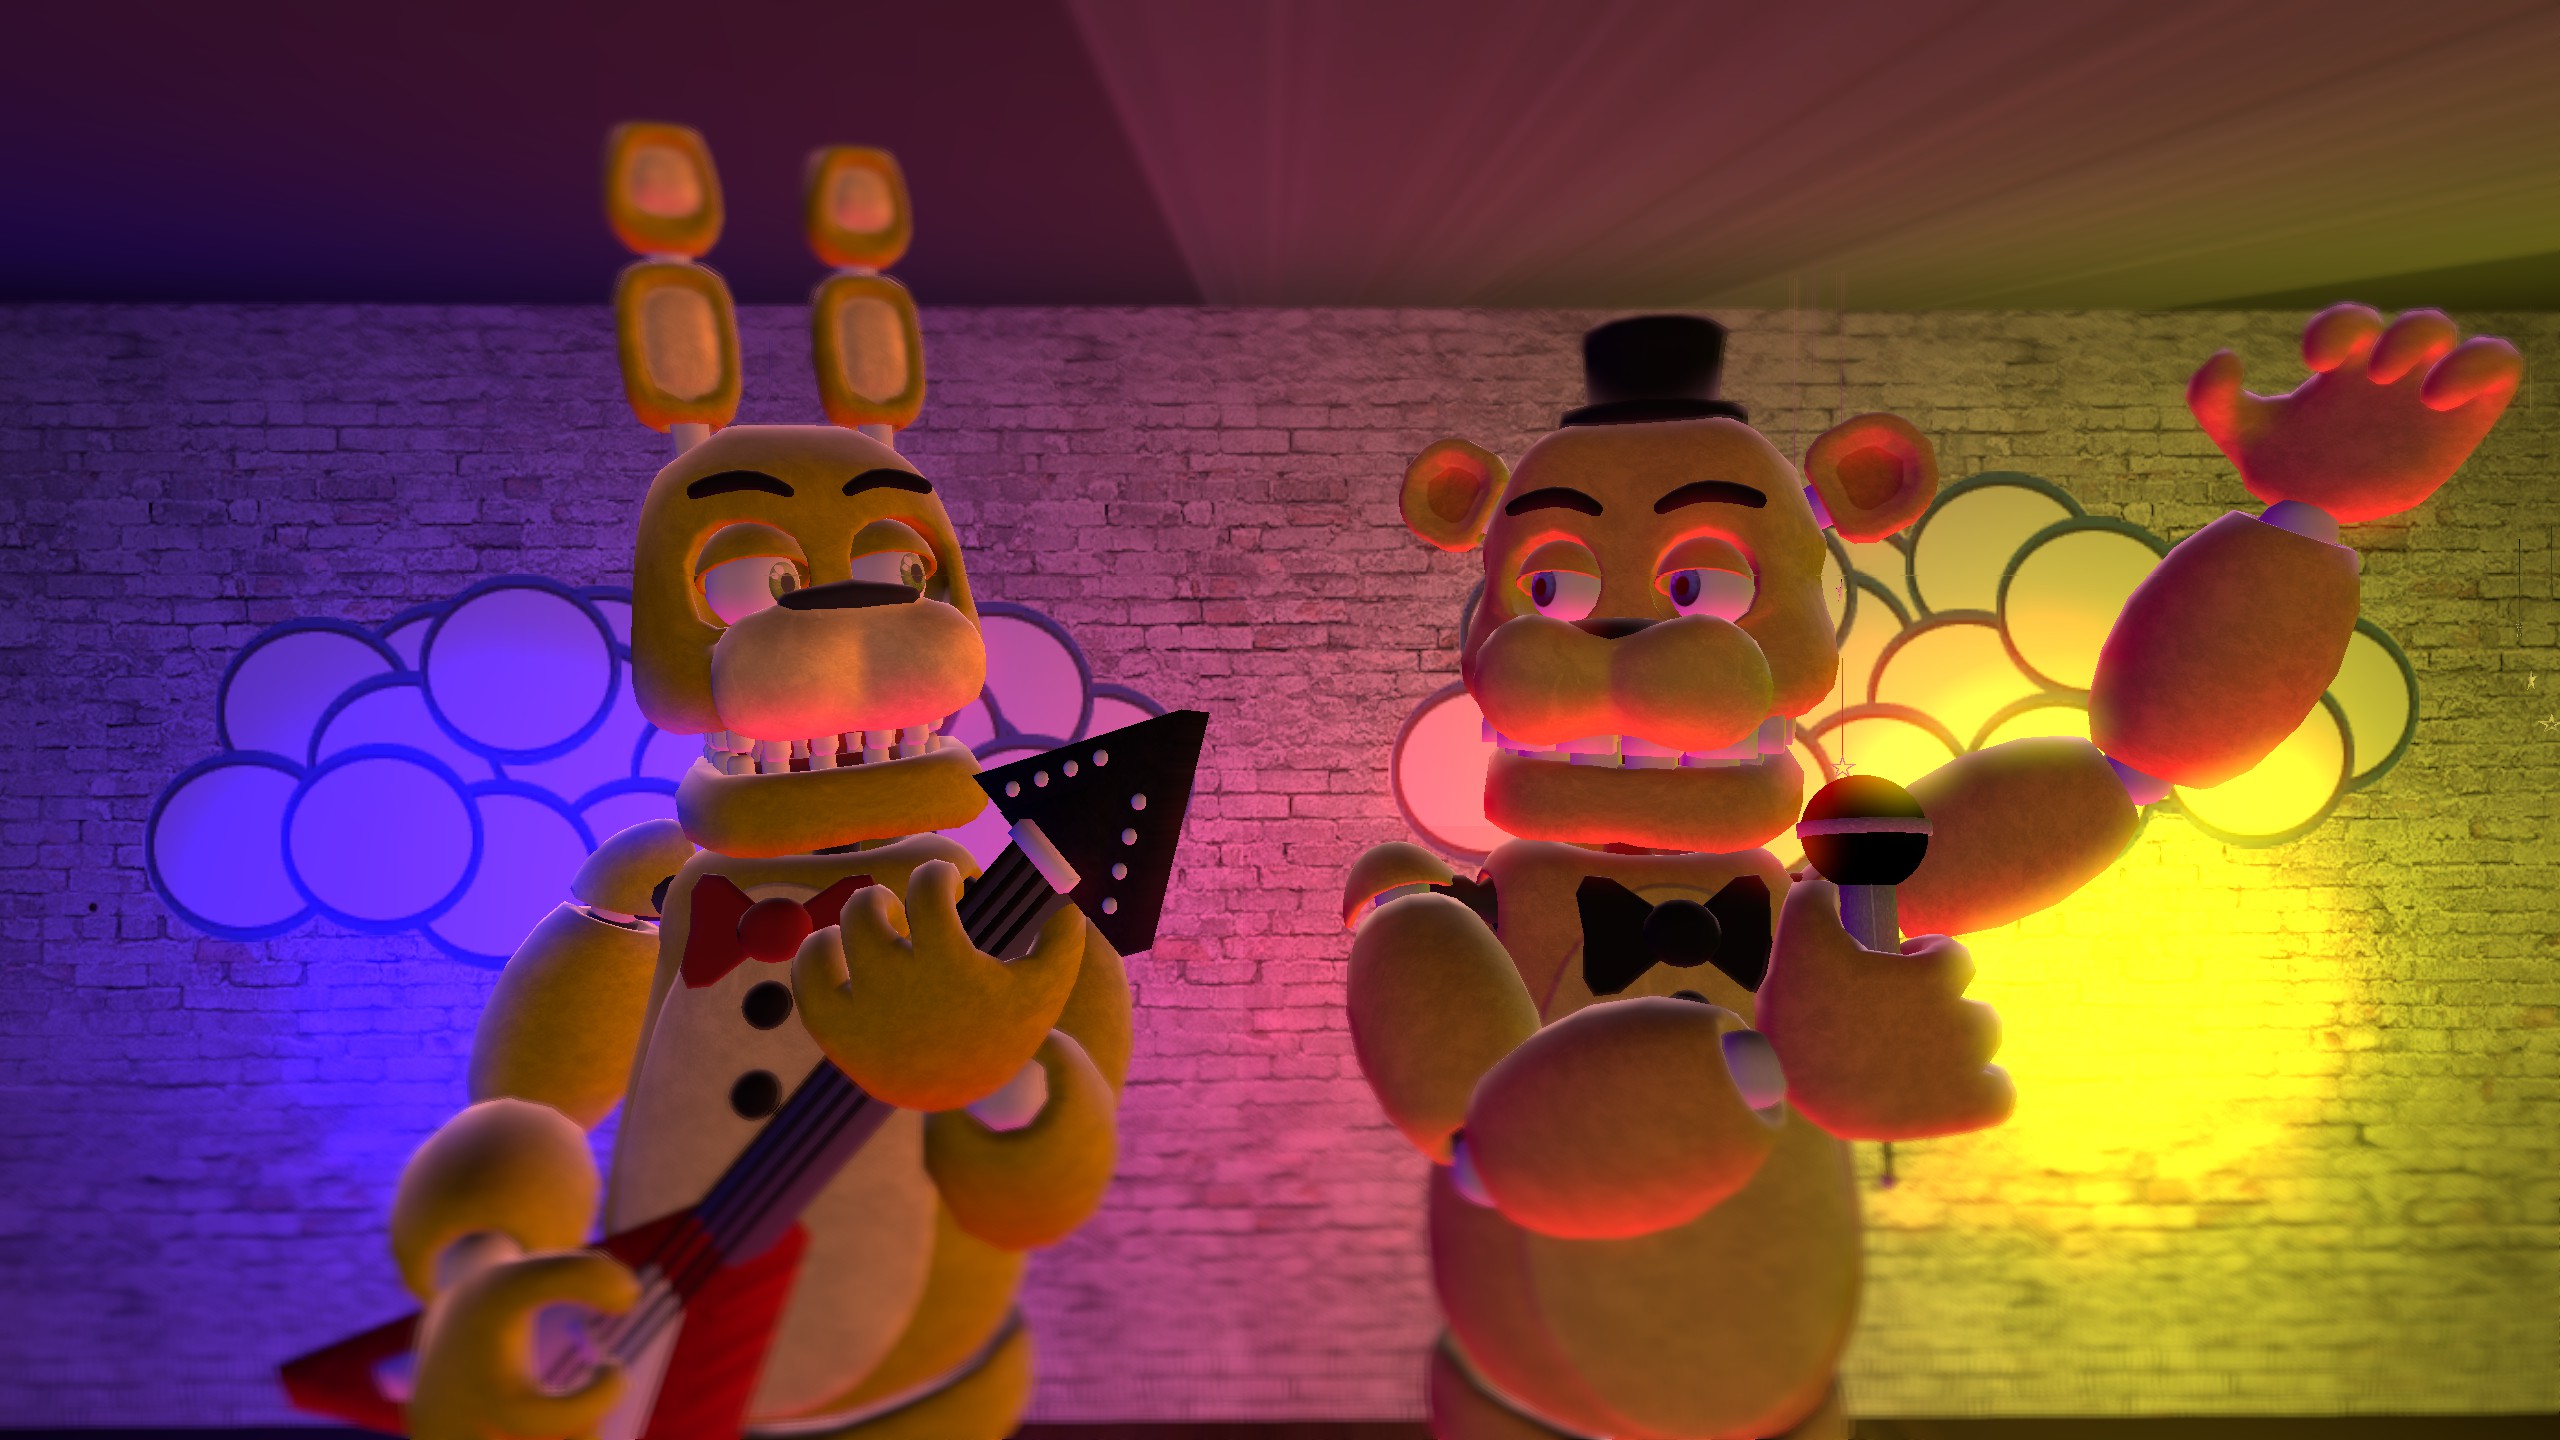 Gmod Fnaf The Beginning Of Nightmare By Therubyminecart On